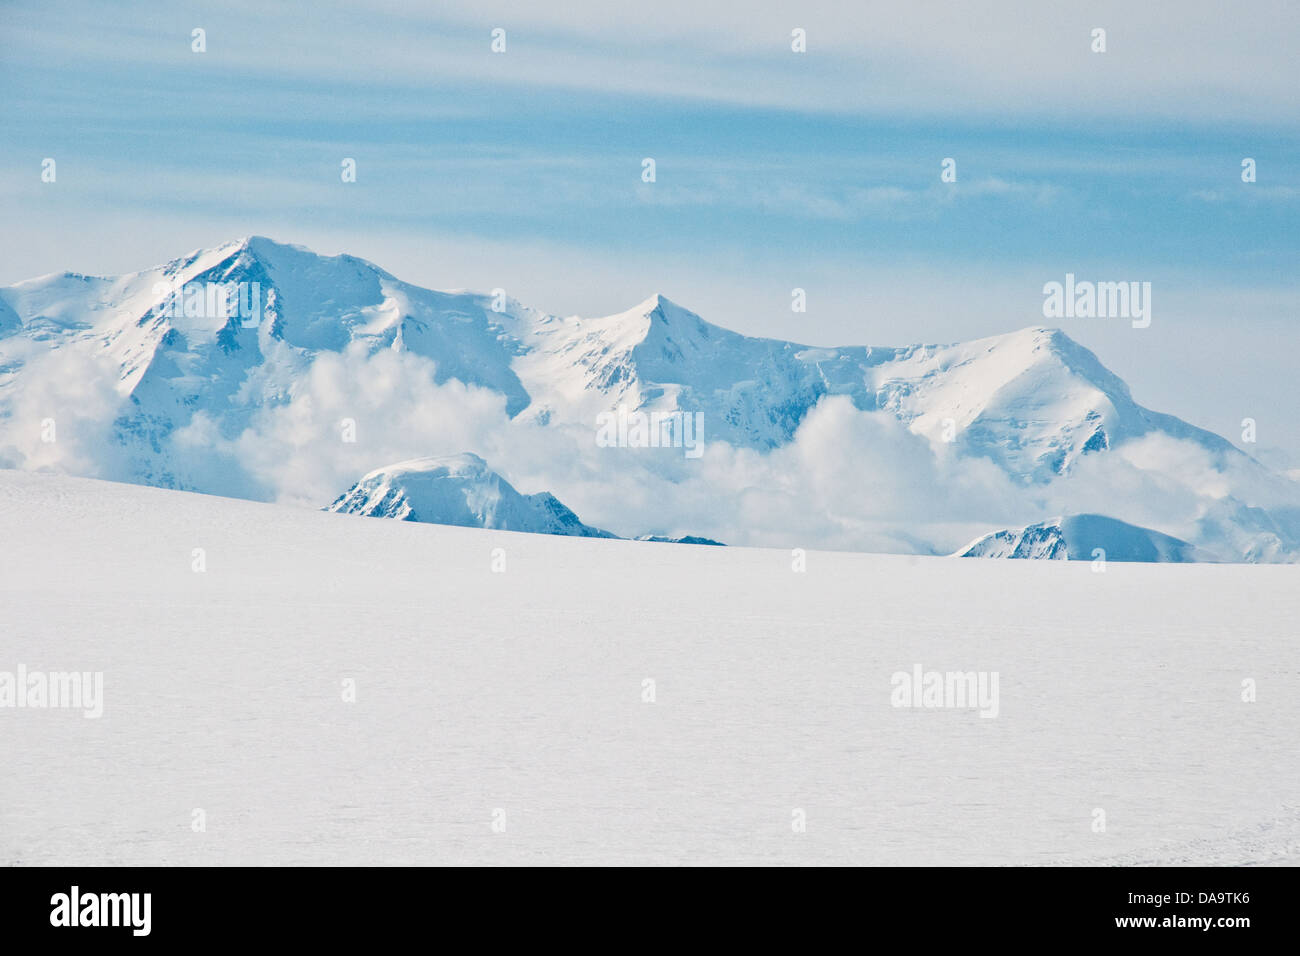 A partial view of the peaks of Mount Lucania in the icefields of the St. Elias range, Kluane National Park, Yukon Territory, Canada. Stock Photo